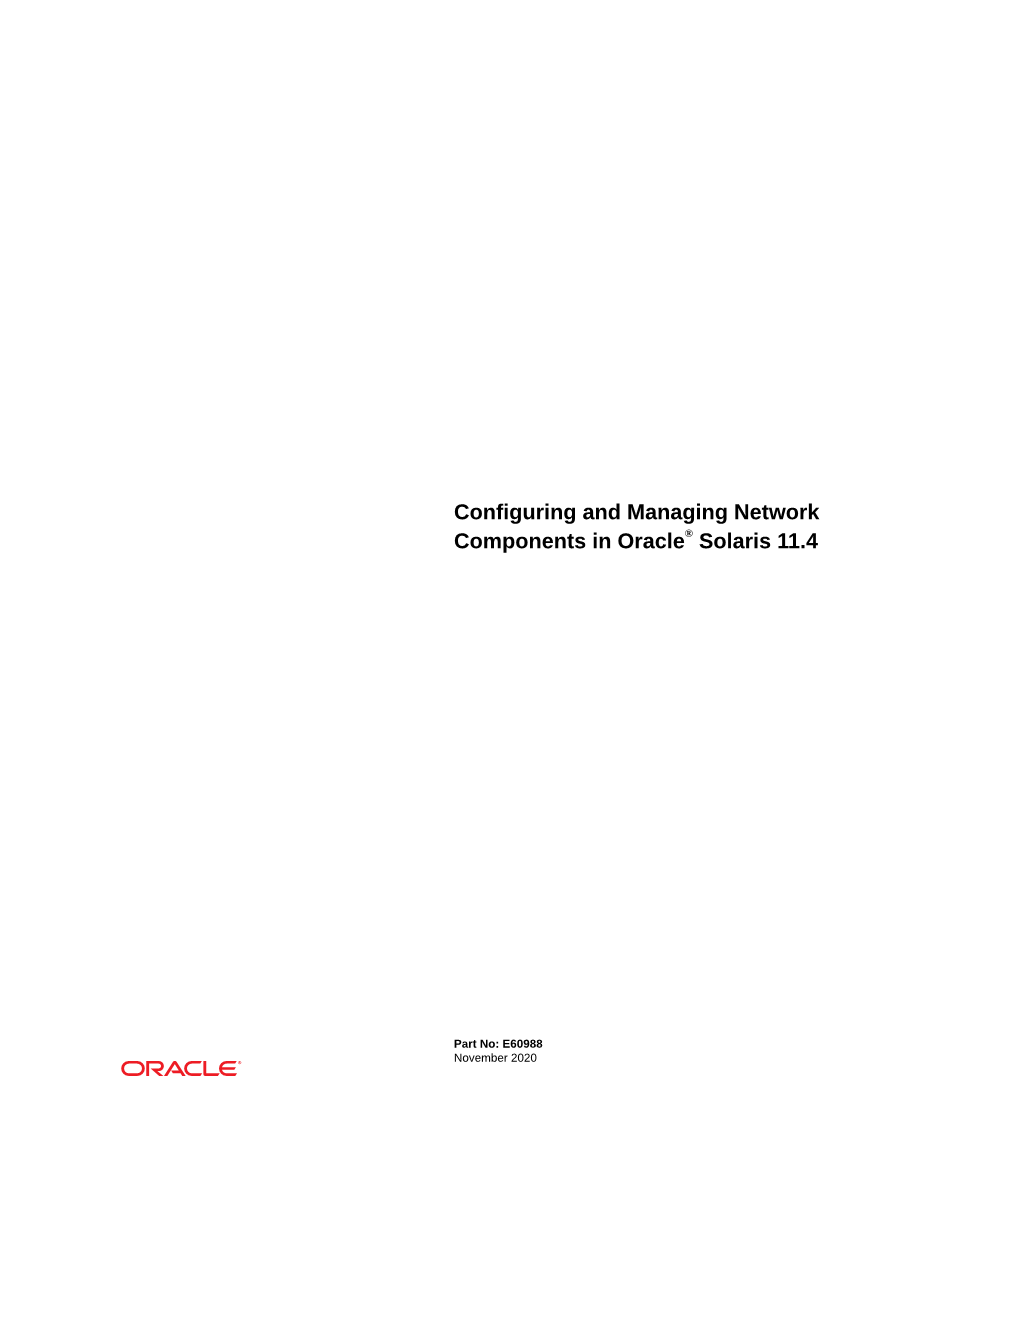 Configuring and Managing Network Components in Oracle® Solaris 11.4